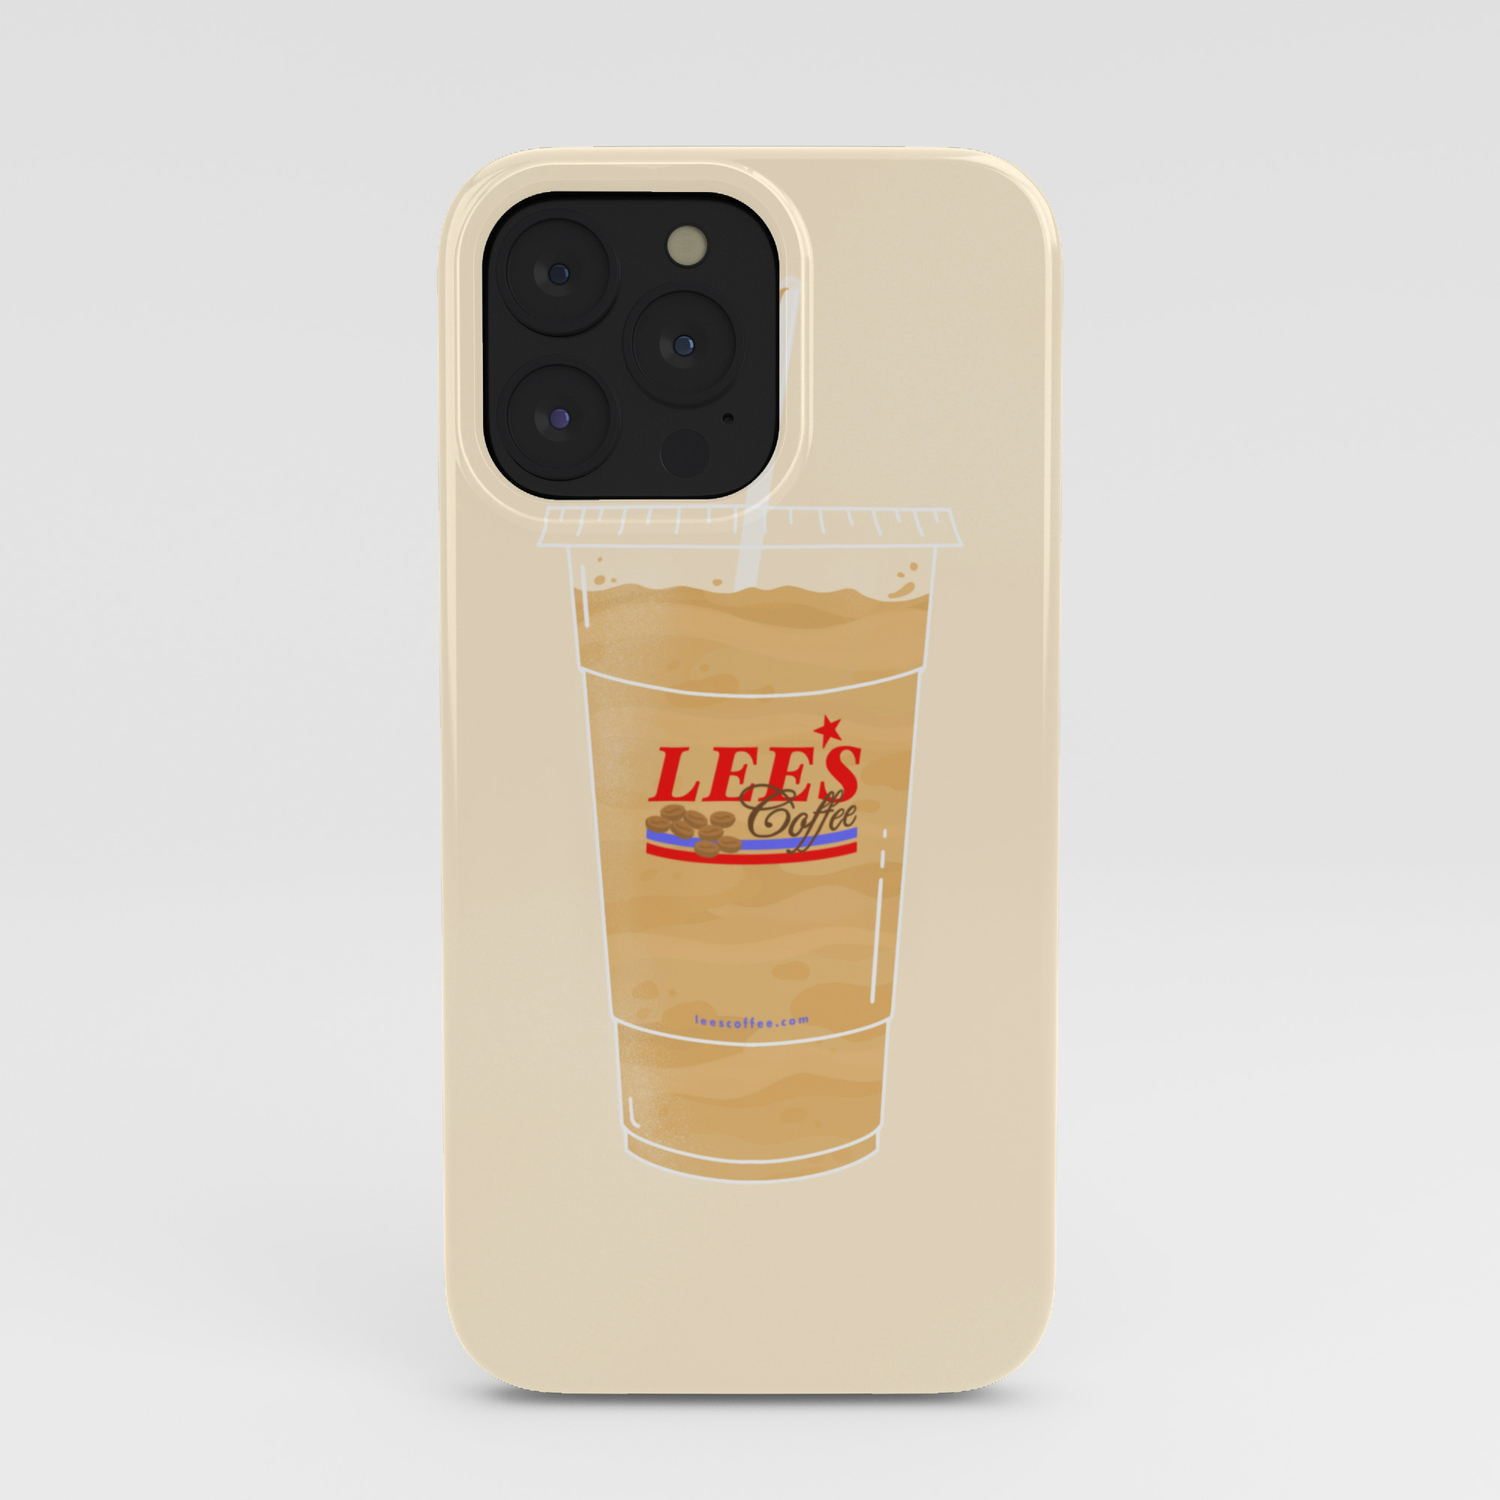 Lee's OKC iPhone Case by Thumy Phan | Society6